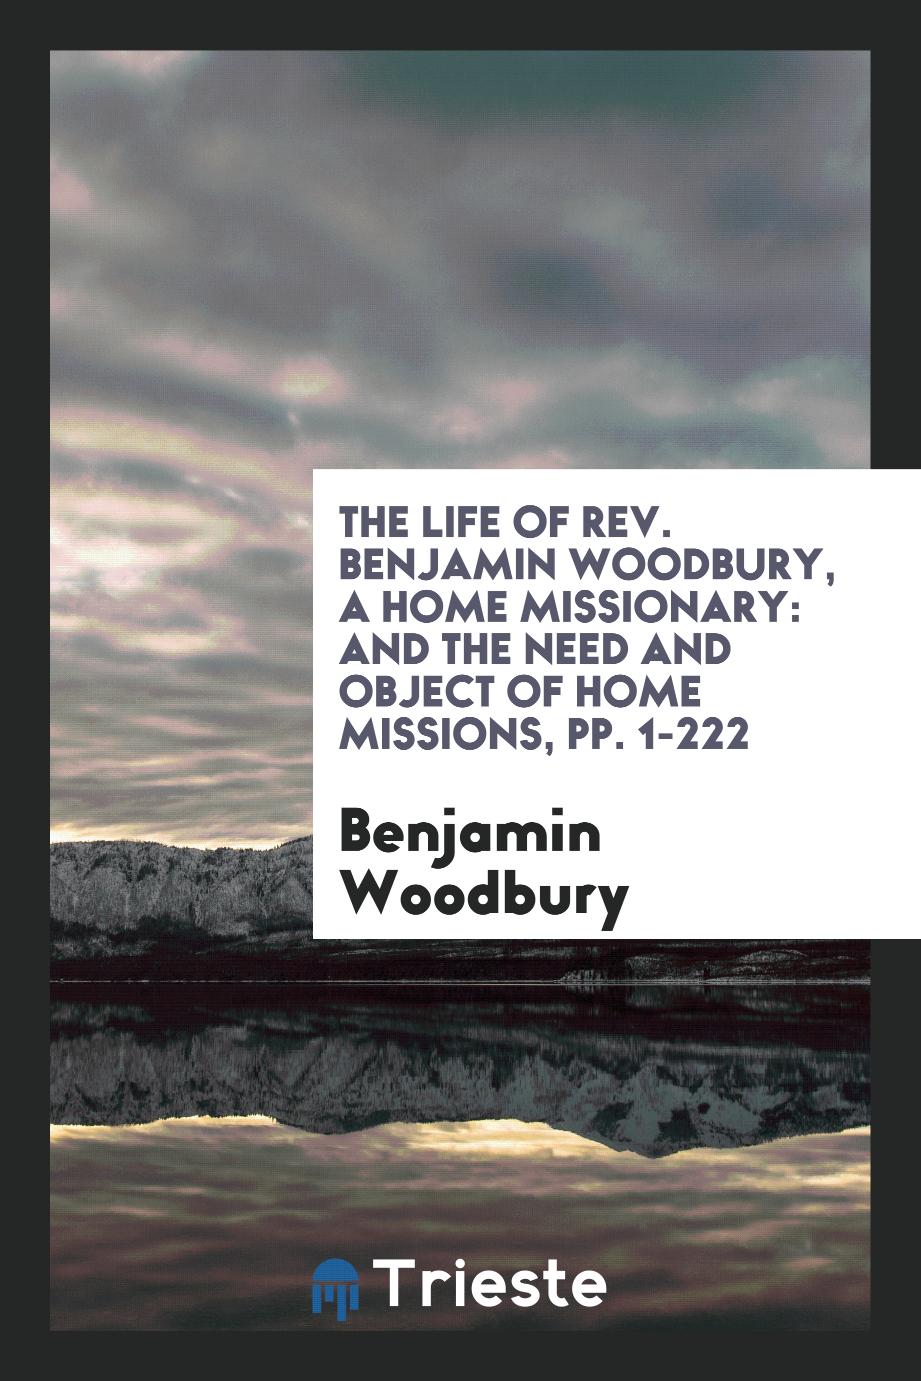 The Life of Rev. Benjamin Woodbury, a Home Missionary: And the Need and Object of Home Missions, pp. 1-222